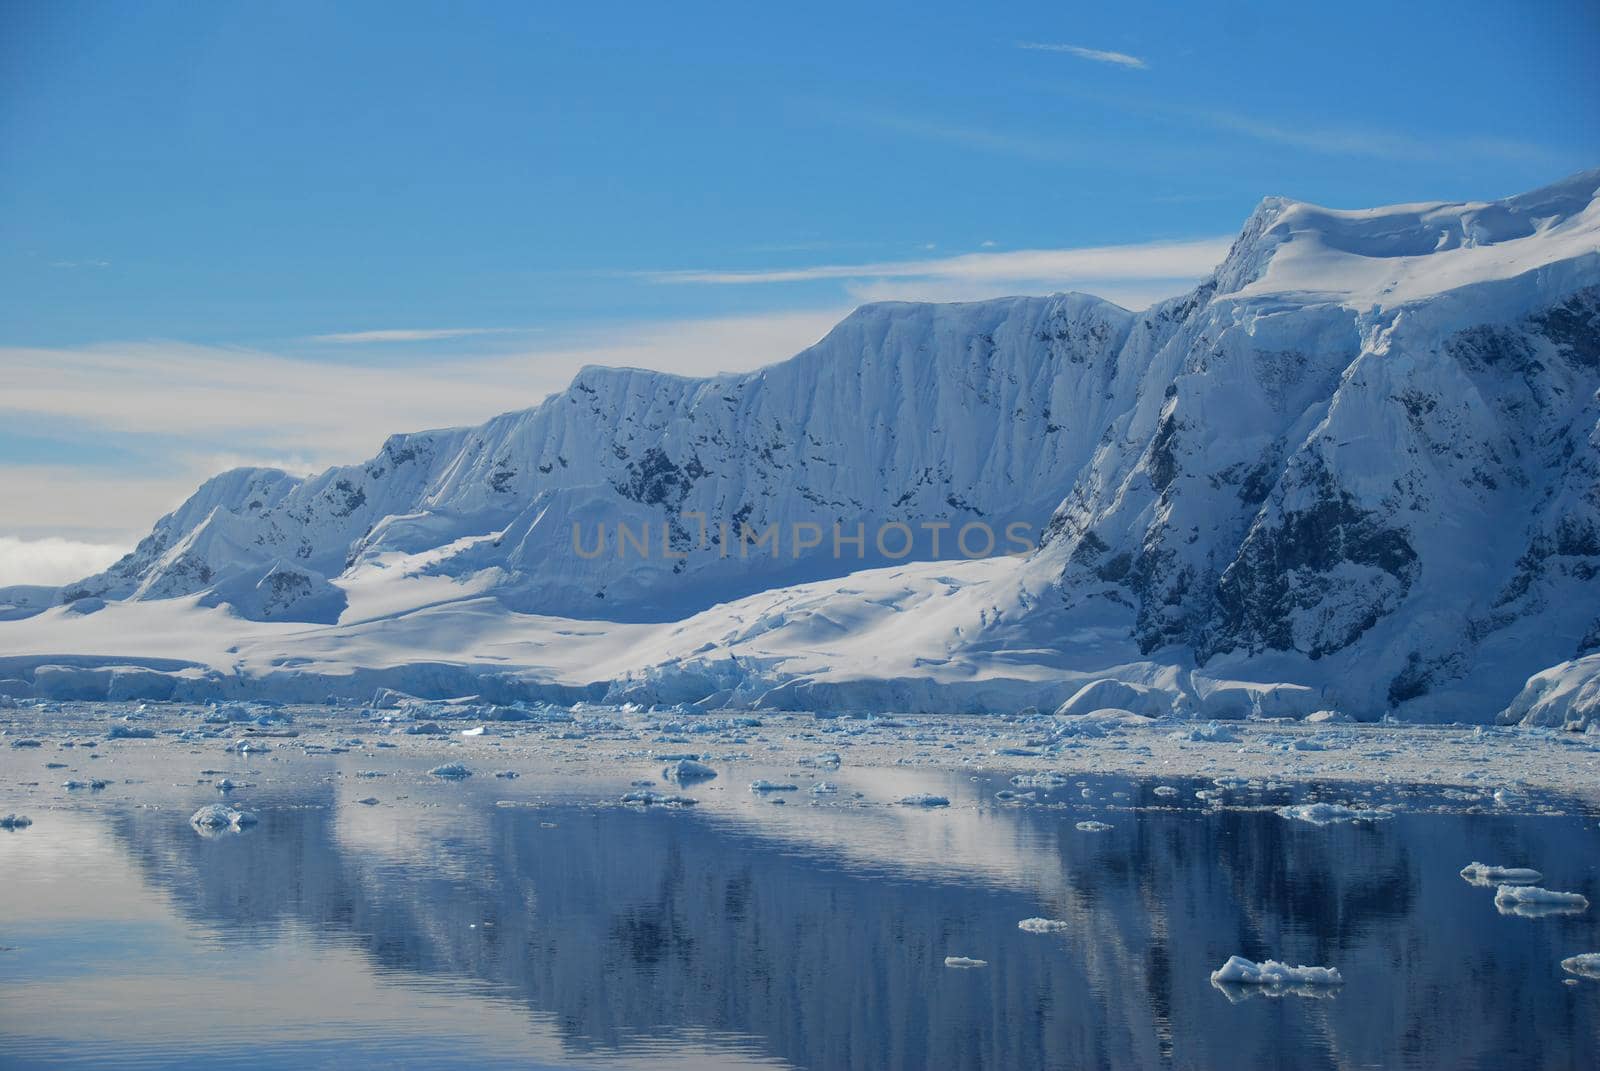 Antarctic landscape in sunny weather